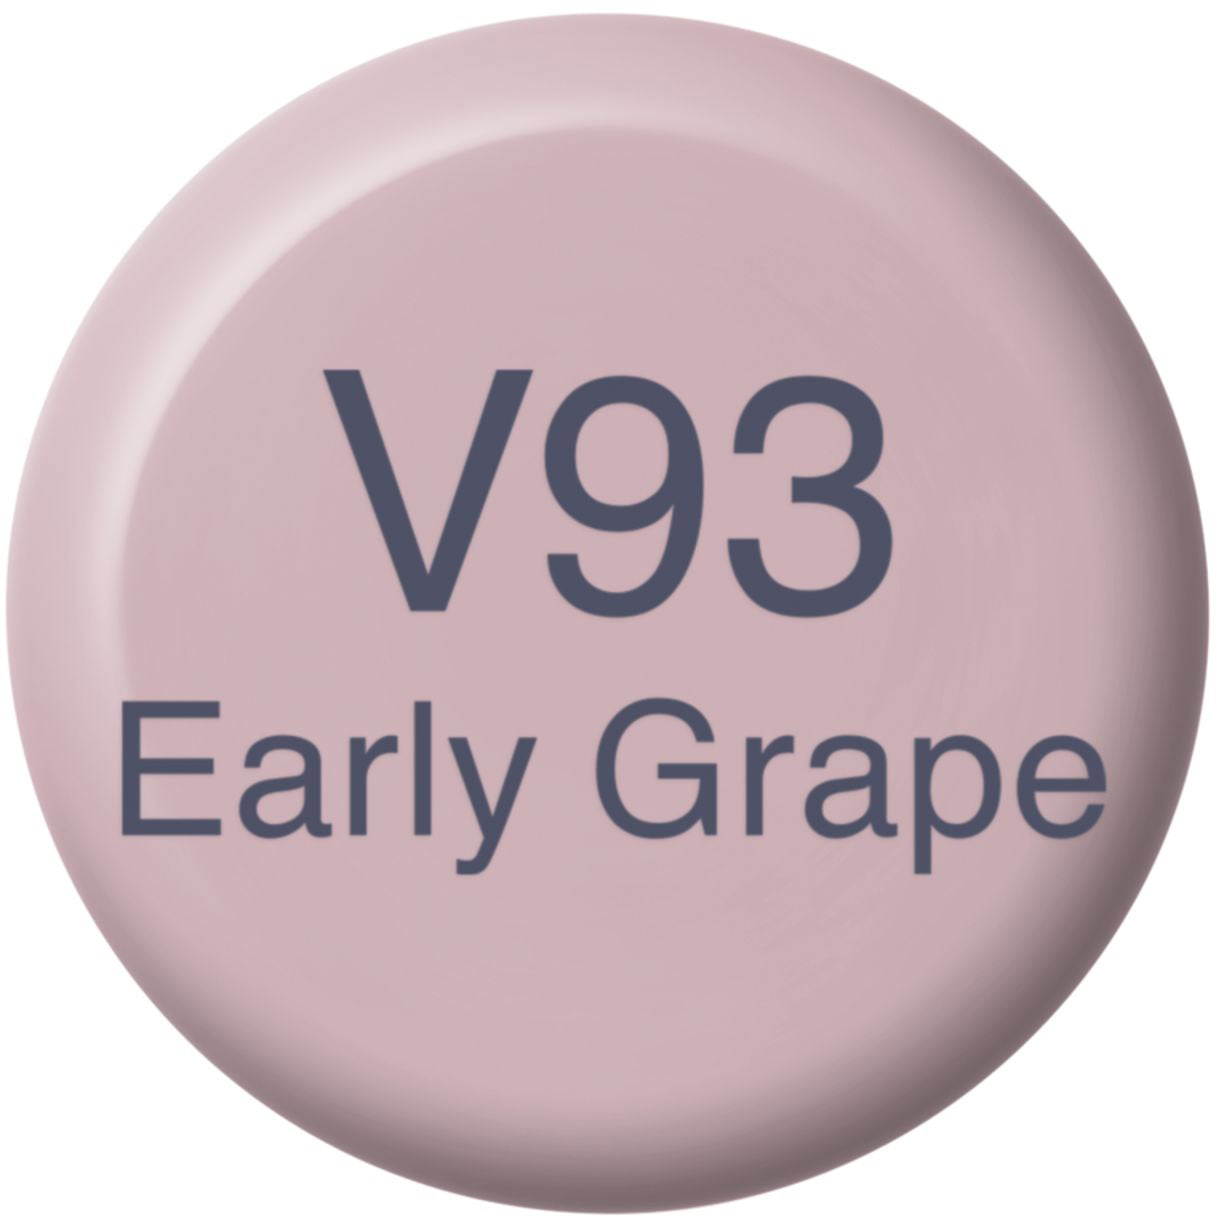 COPIC Ink Refill 21076297 V93 - Early Grape